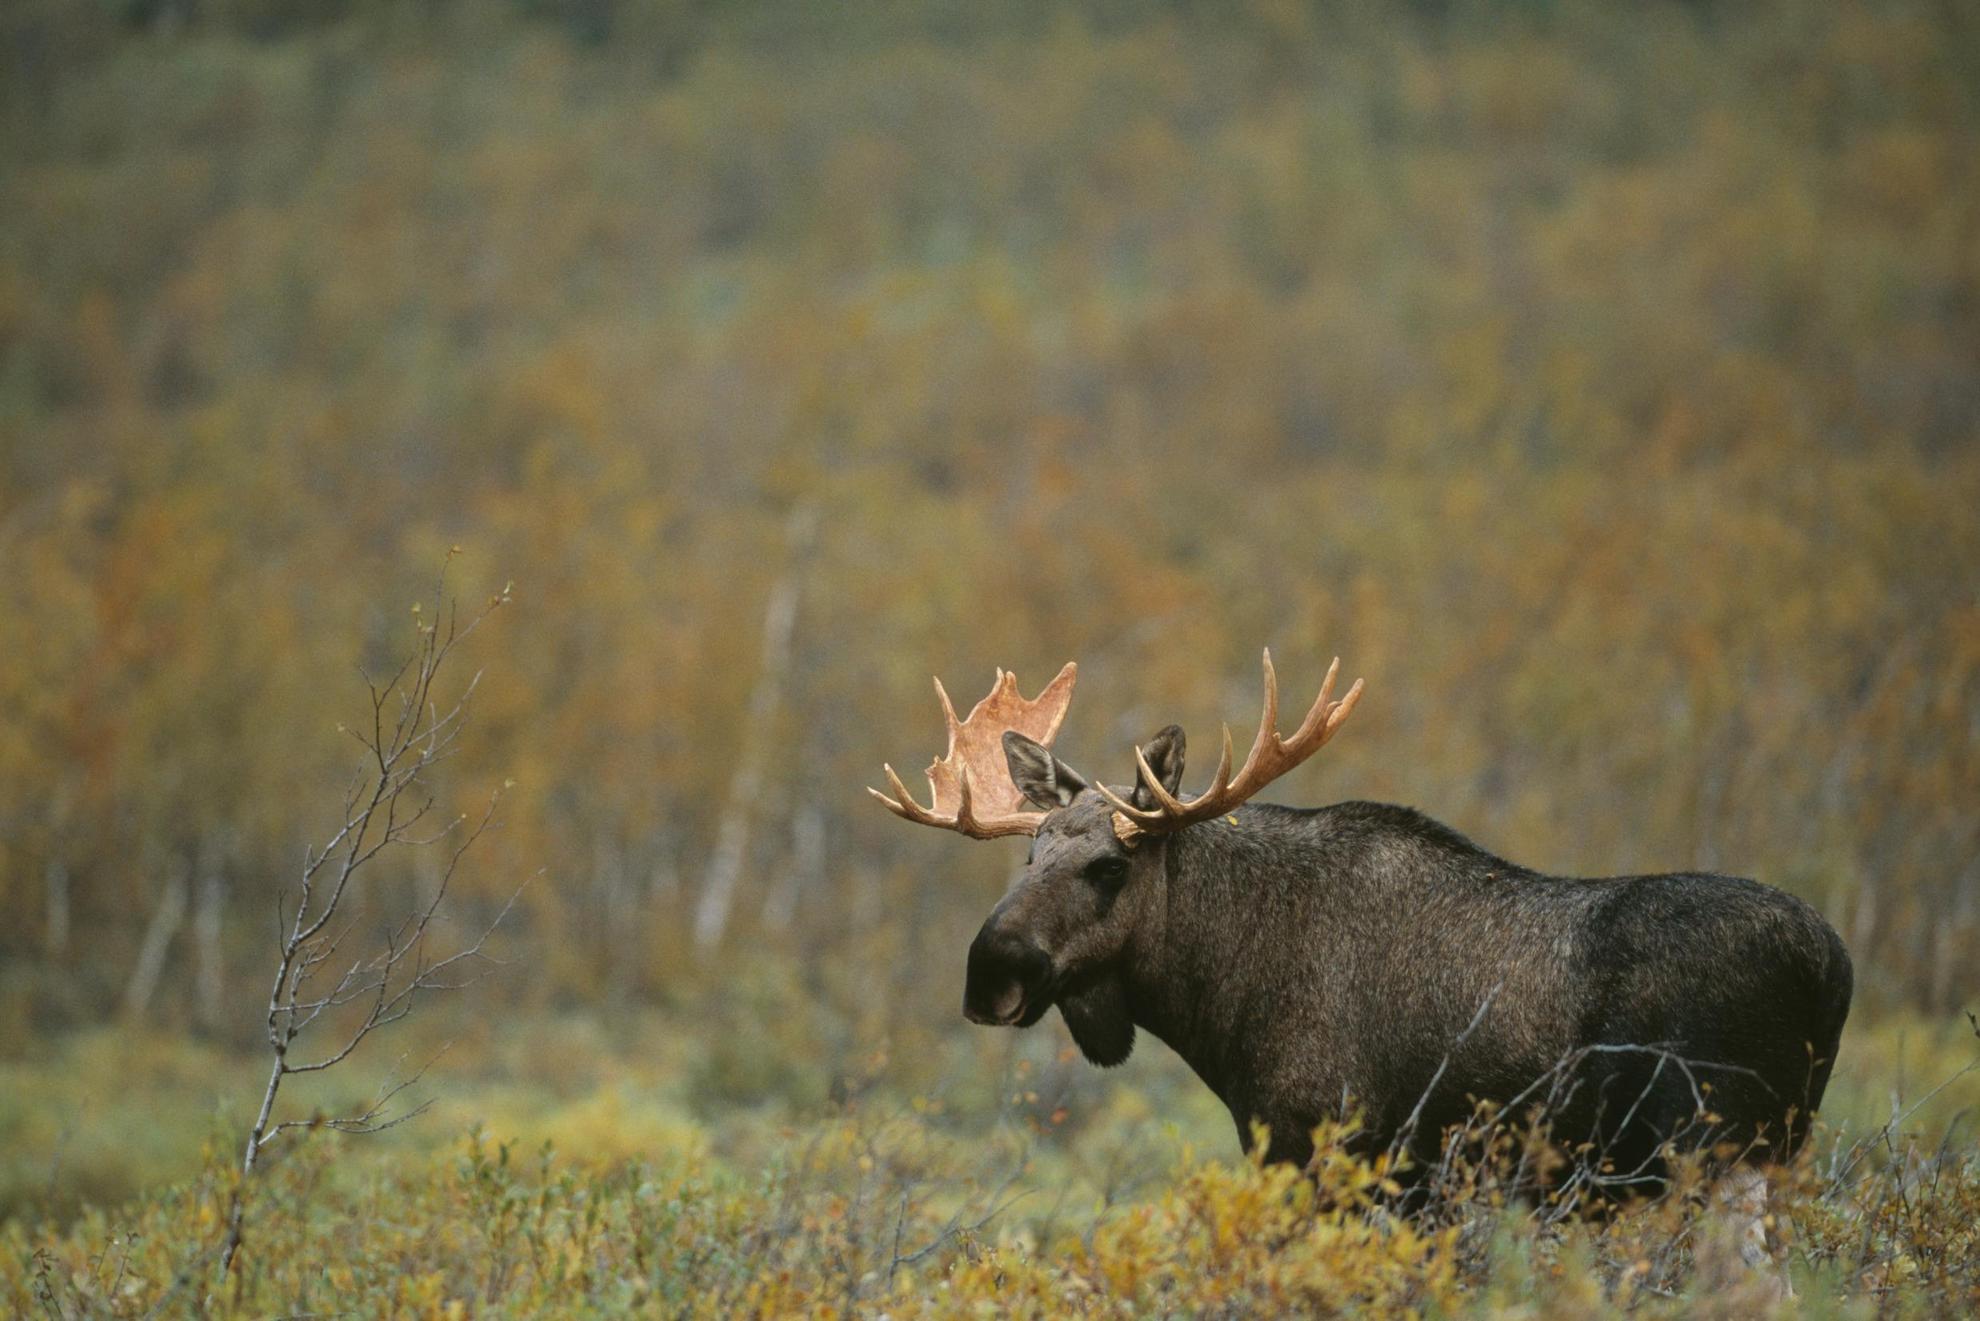 A male moose with large antlers stands in a forest clearing.